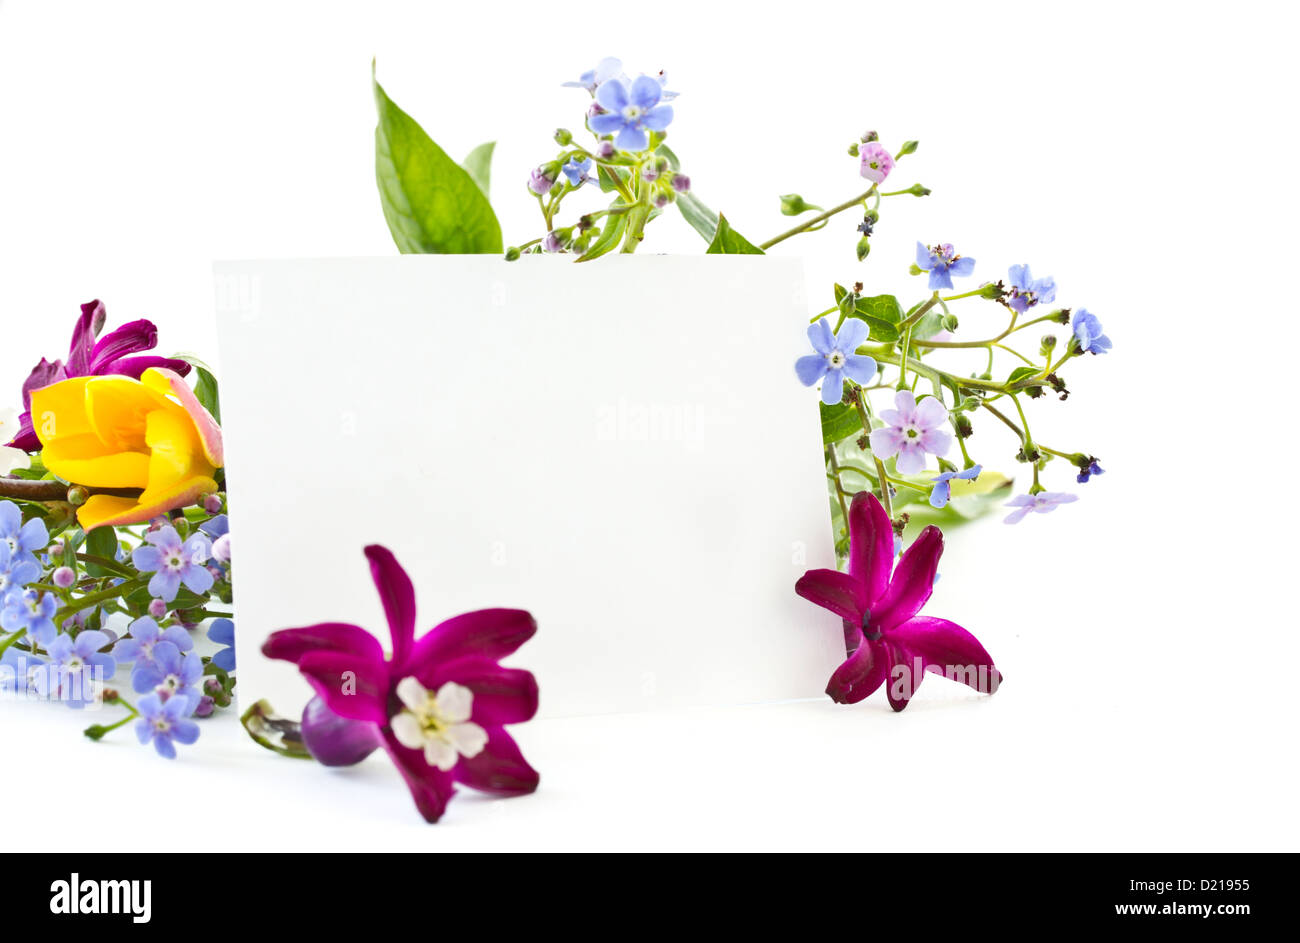 bouquet of spring flowers on a white background Stock Photo